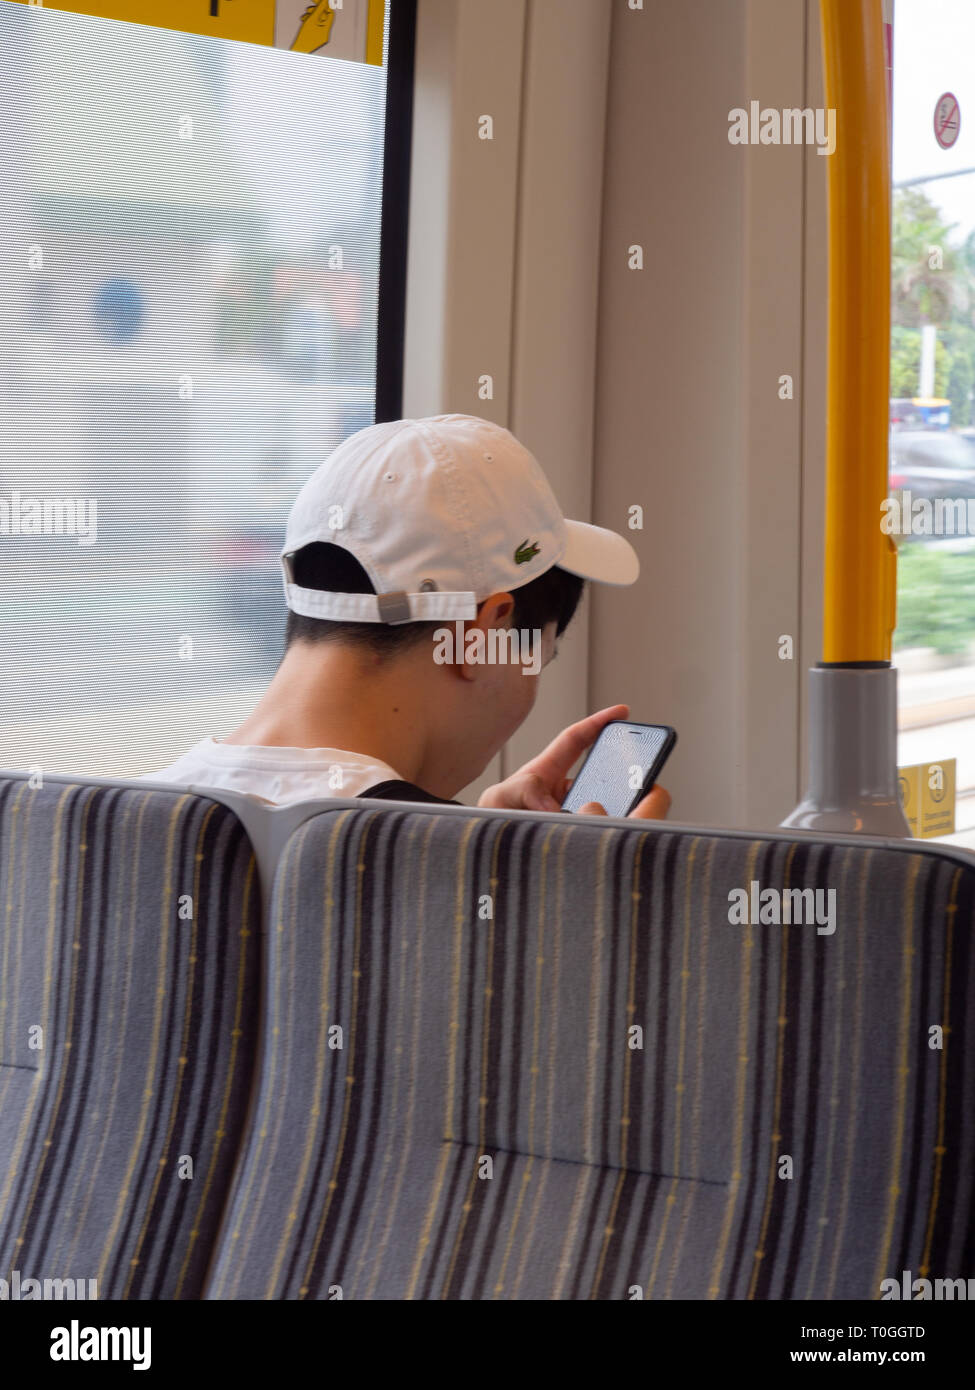 Passenger Looking At Their Phone While Riding A Tram Stock Photo